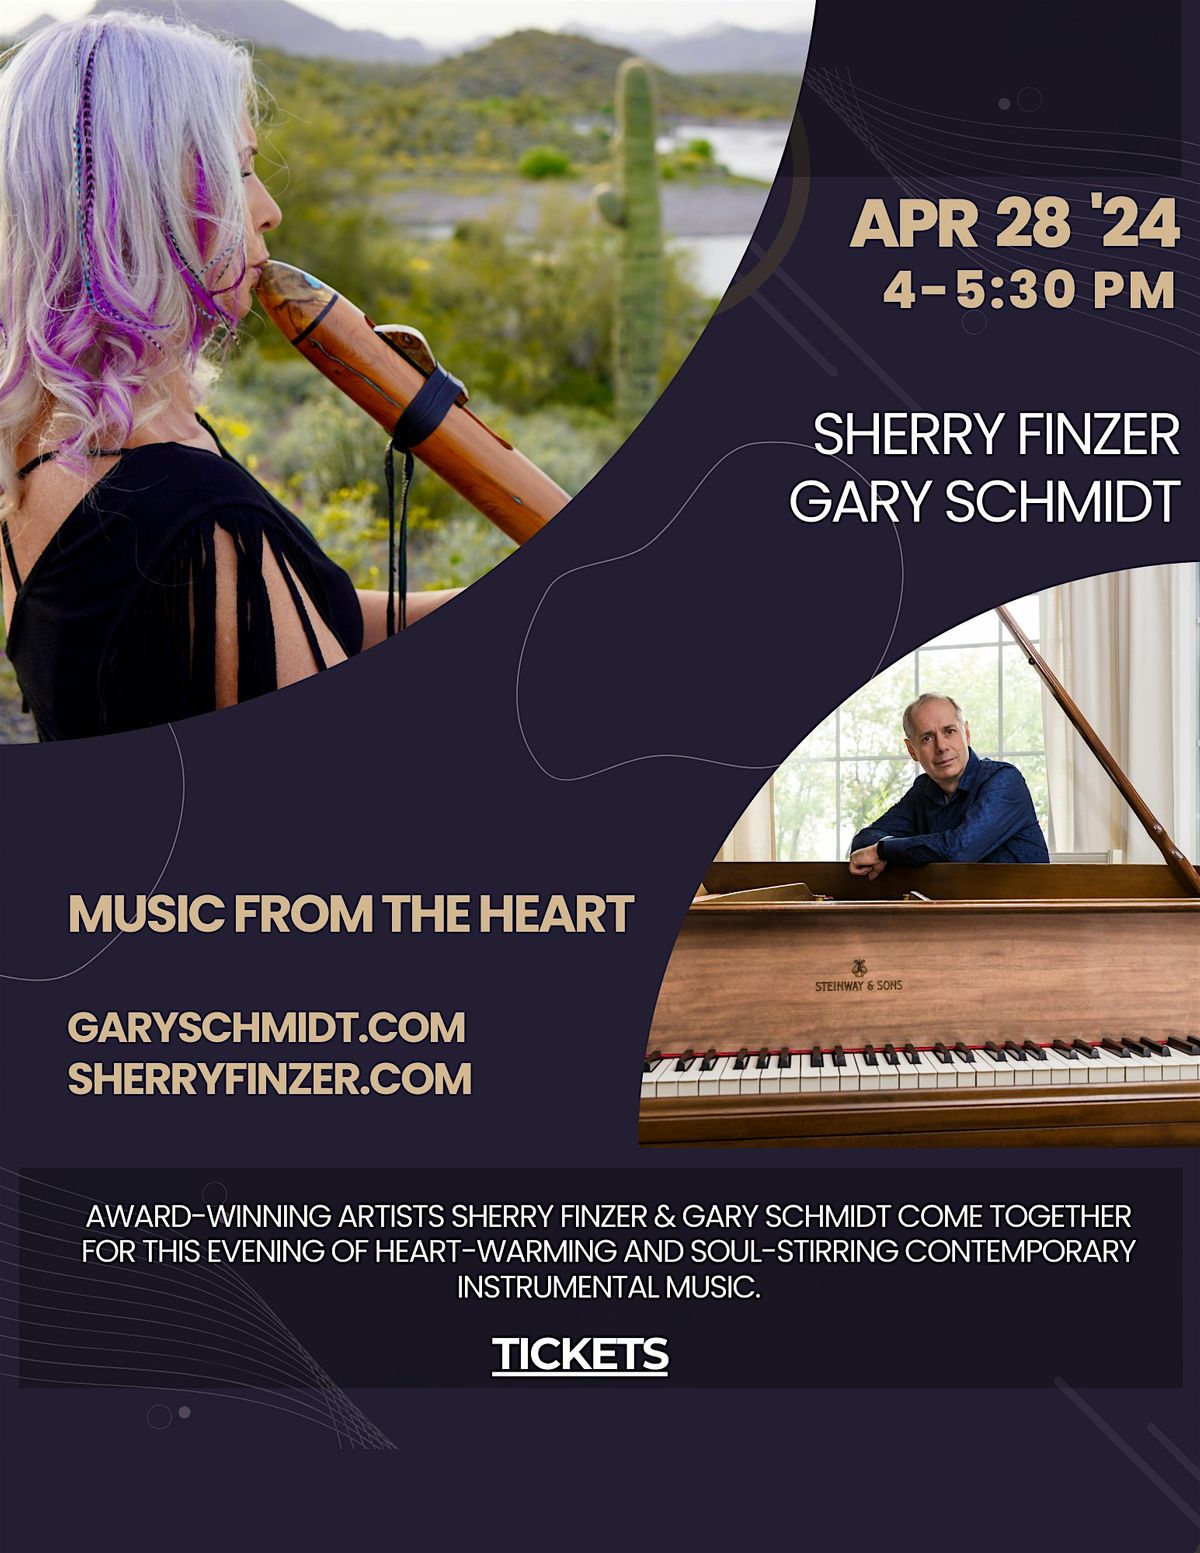 Soul Stirring Music from the Heart with Sherry Finzer & Gary Schmidt